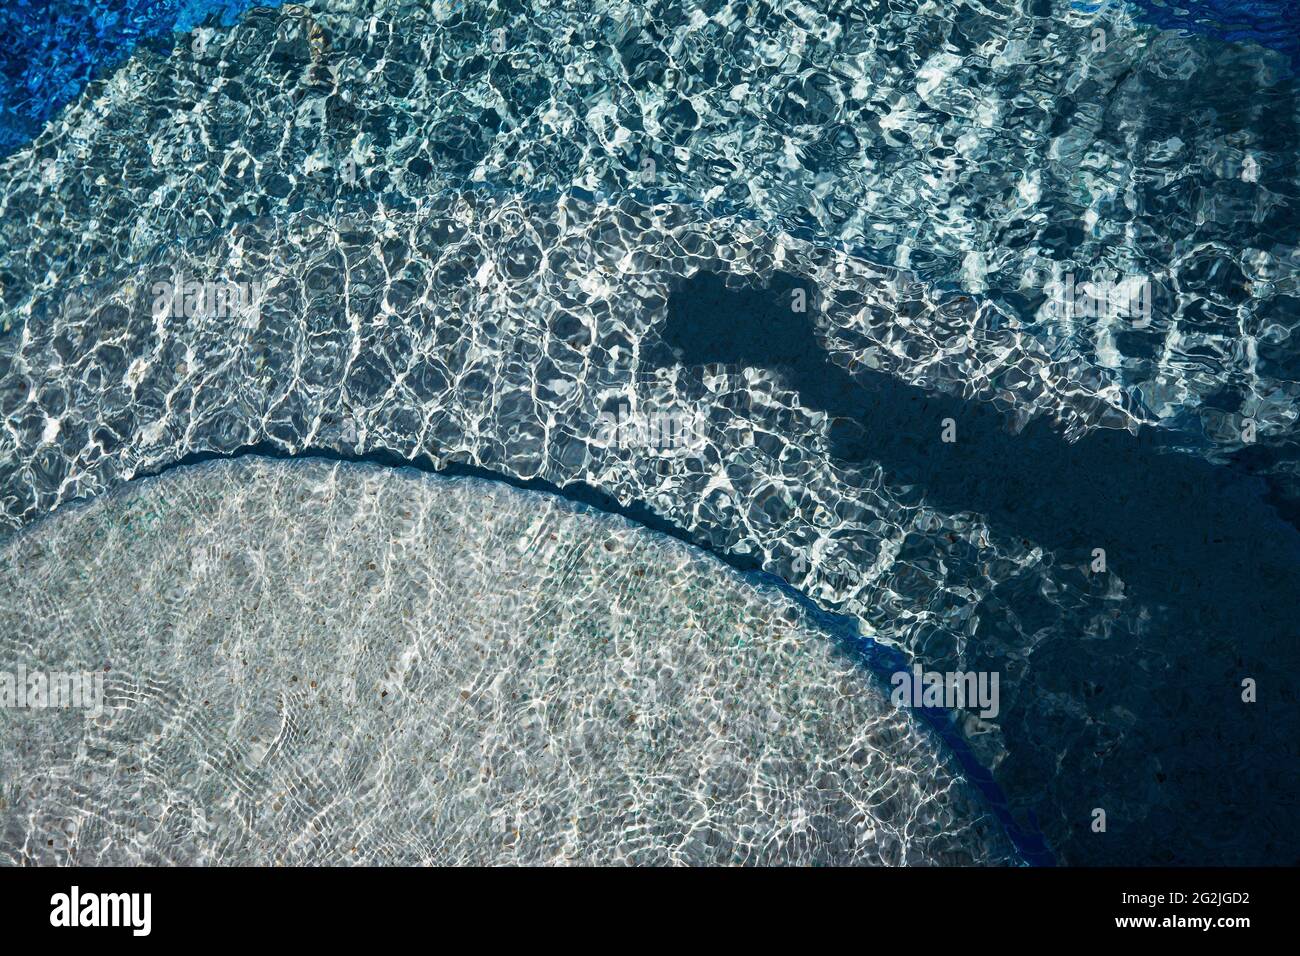 Summer mood, rippling waves in the pool, honeycomb pattern, shadow shows arm with camera Stock Photo